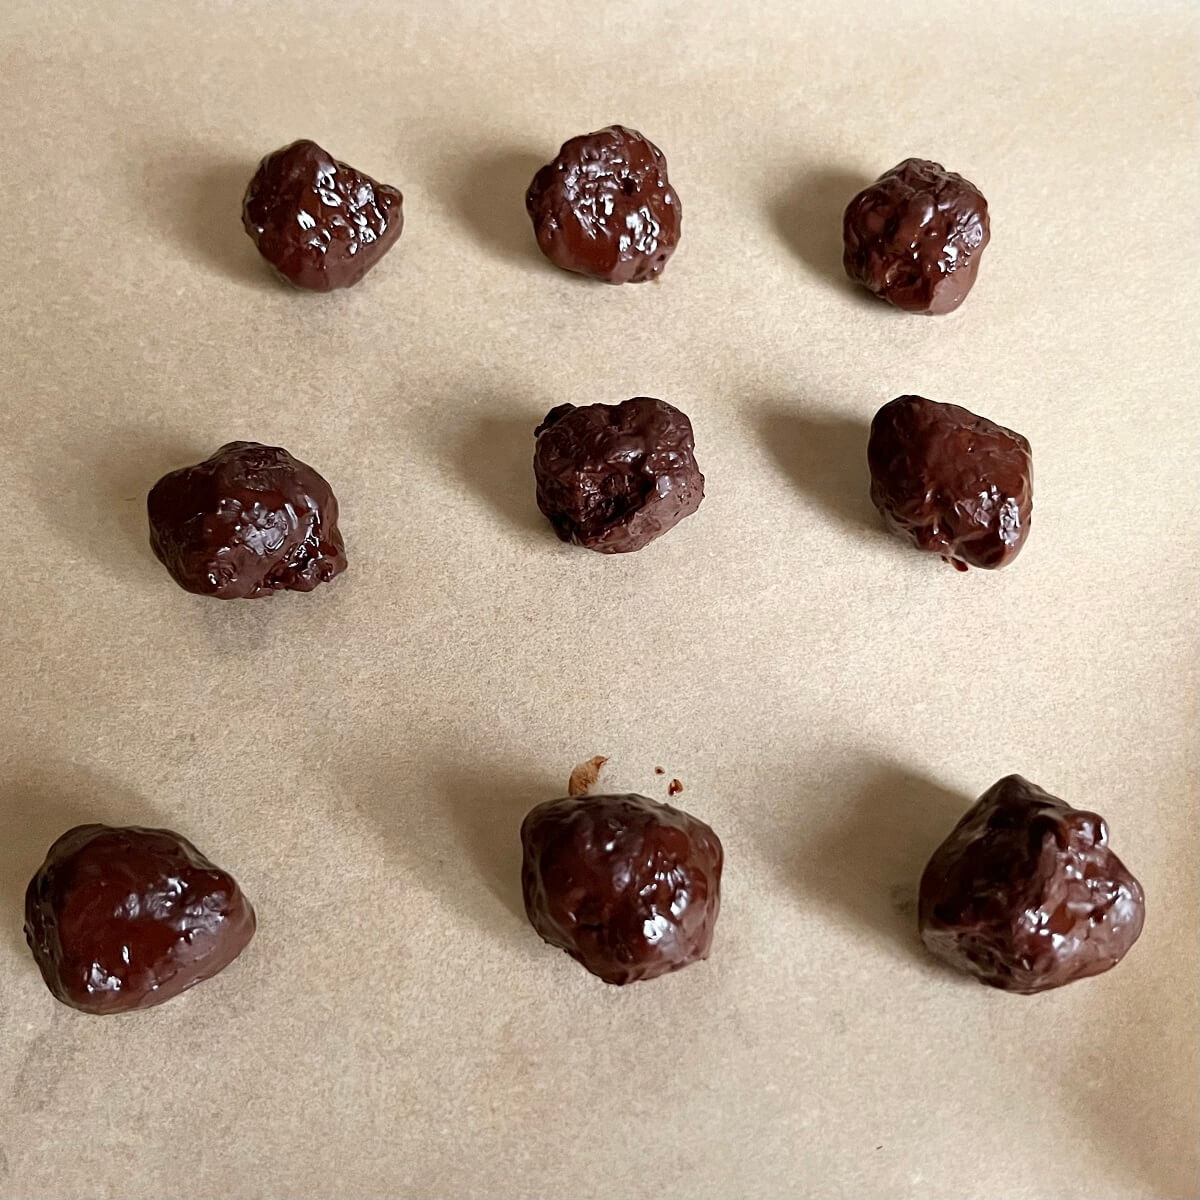 Chocolate olive oil balls on a piece of parchment paper.